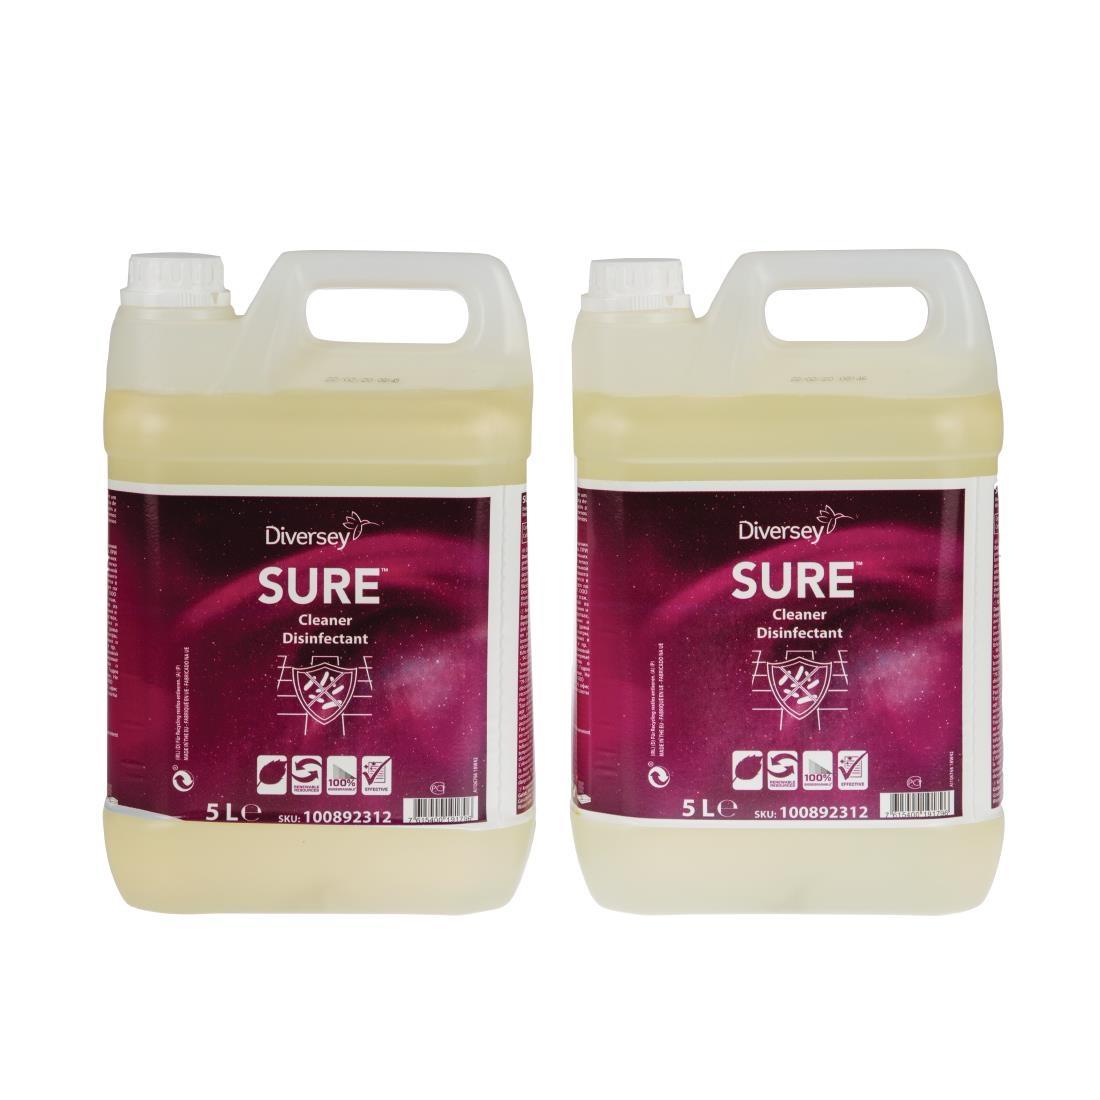 SURE Cleaner and Disinfectant Concentrate 5Ltr (2 Pack) - FA237  - 6